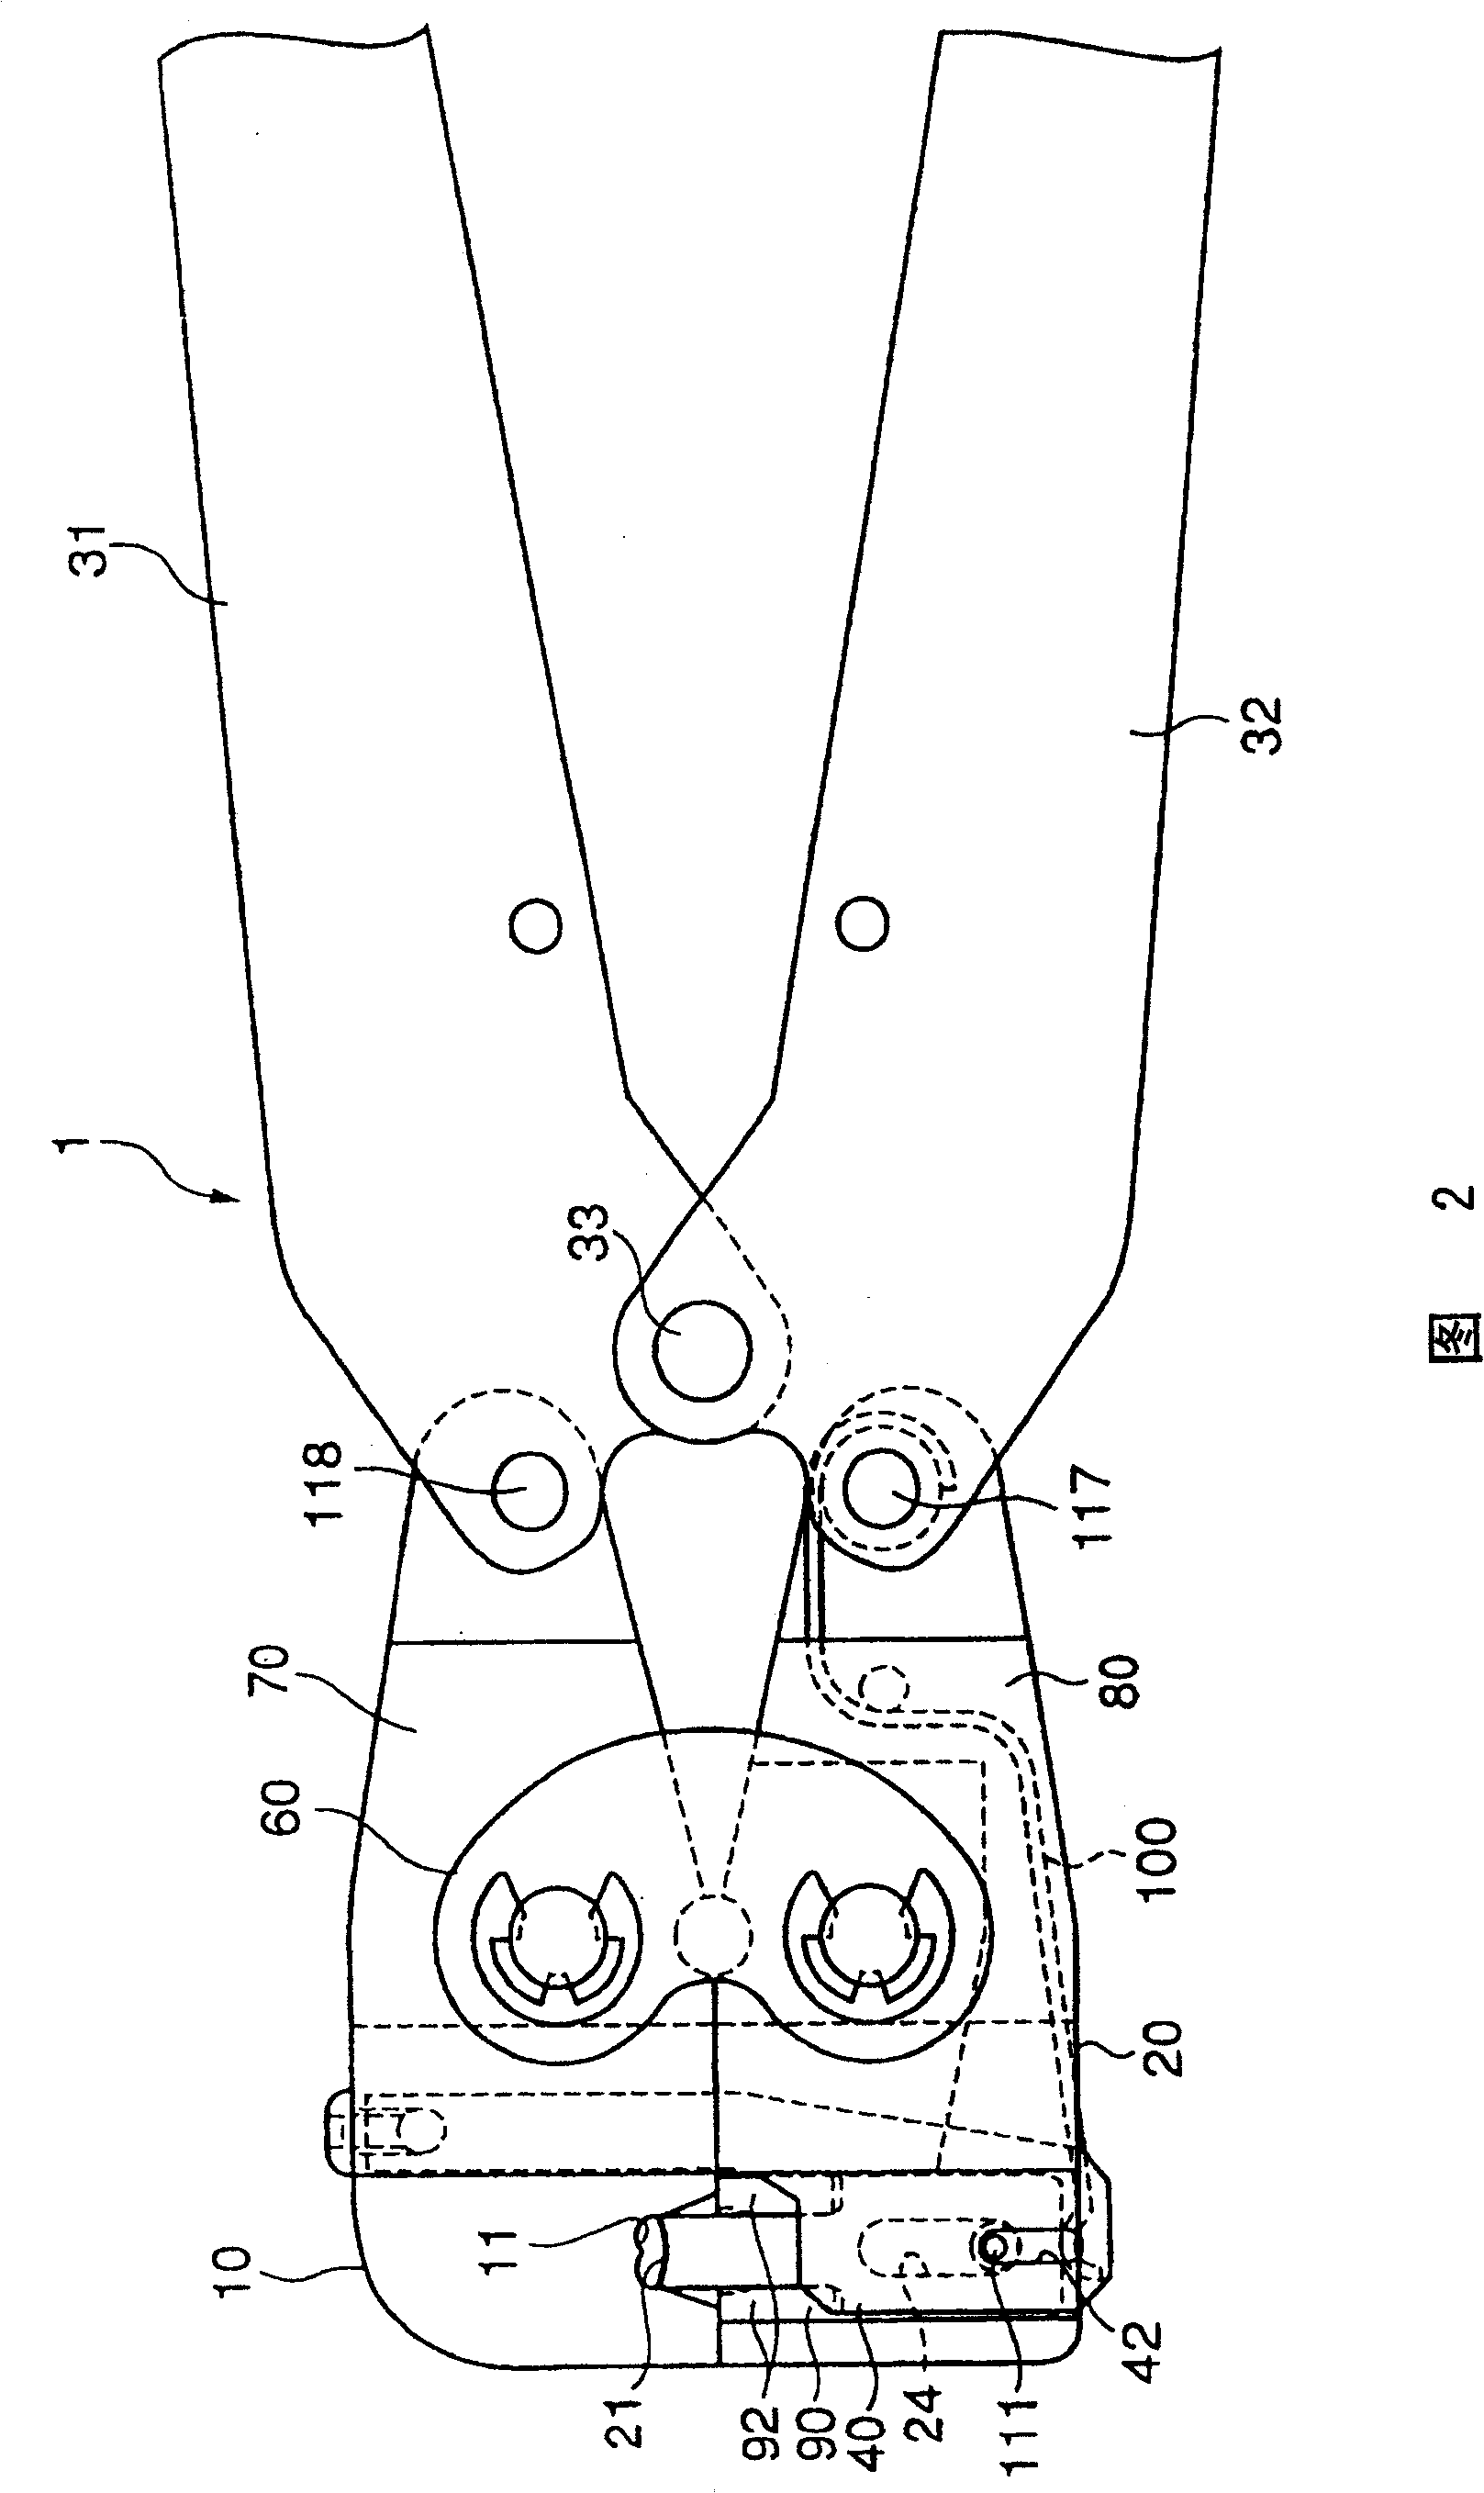 Hand crimp connecting tool